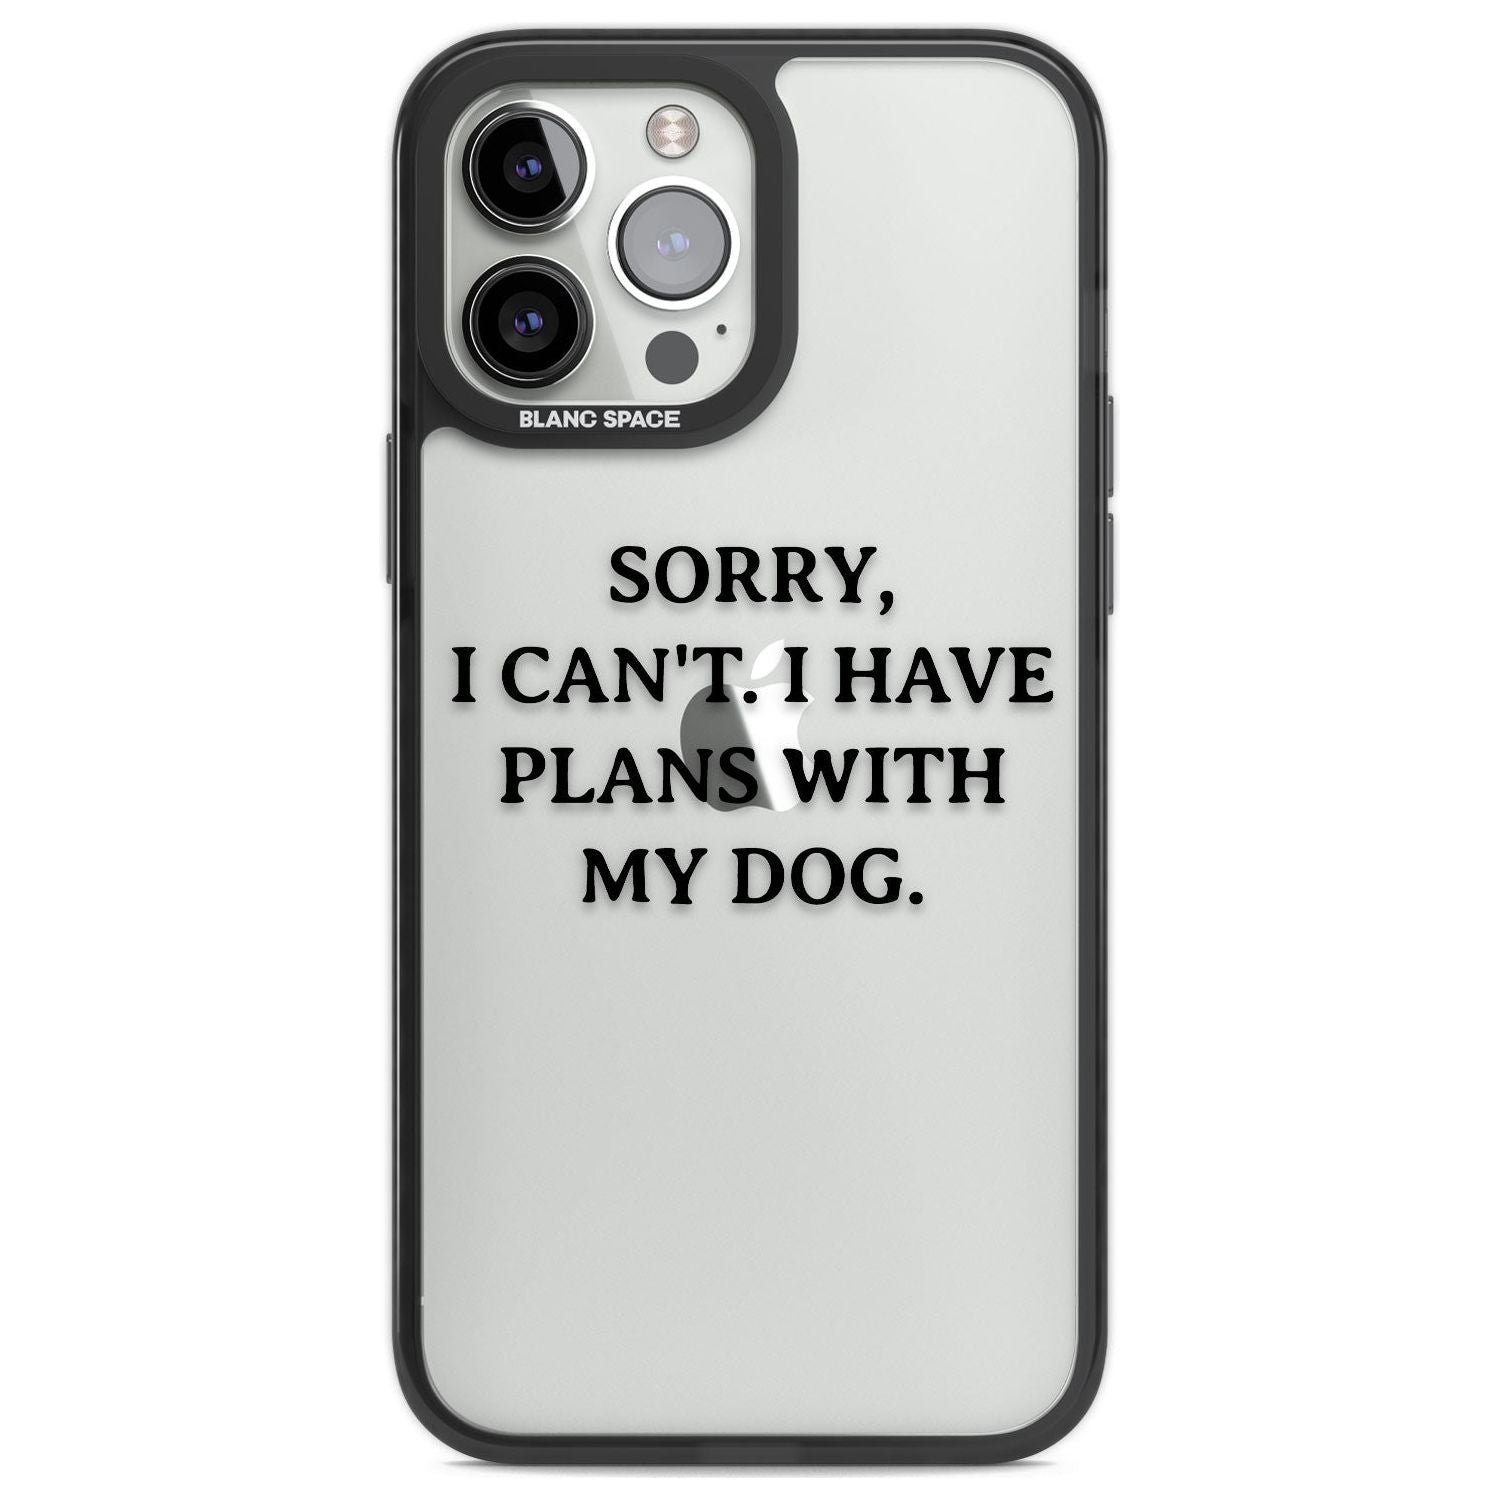 I Have Plans With My Dog Phone Case iPhone 13 Pro Max / Black Impact Case,iPhone 14 Pro Max / Black Impact Case Blanc Space